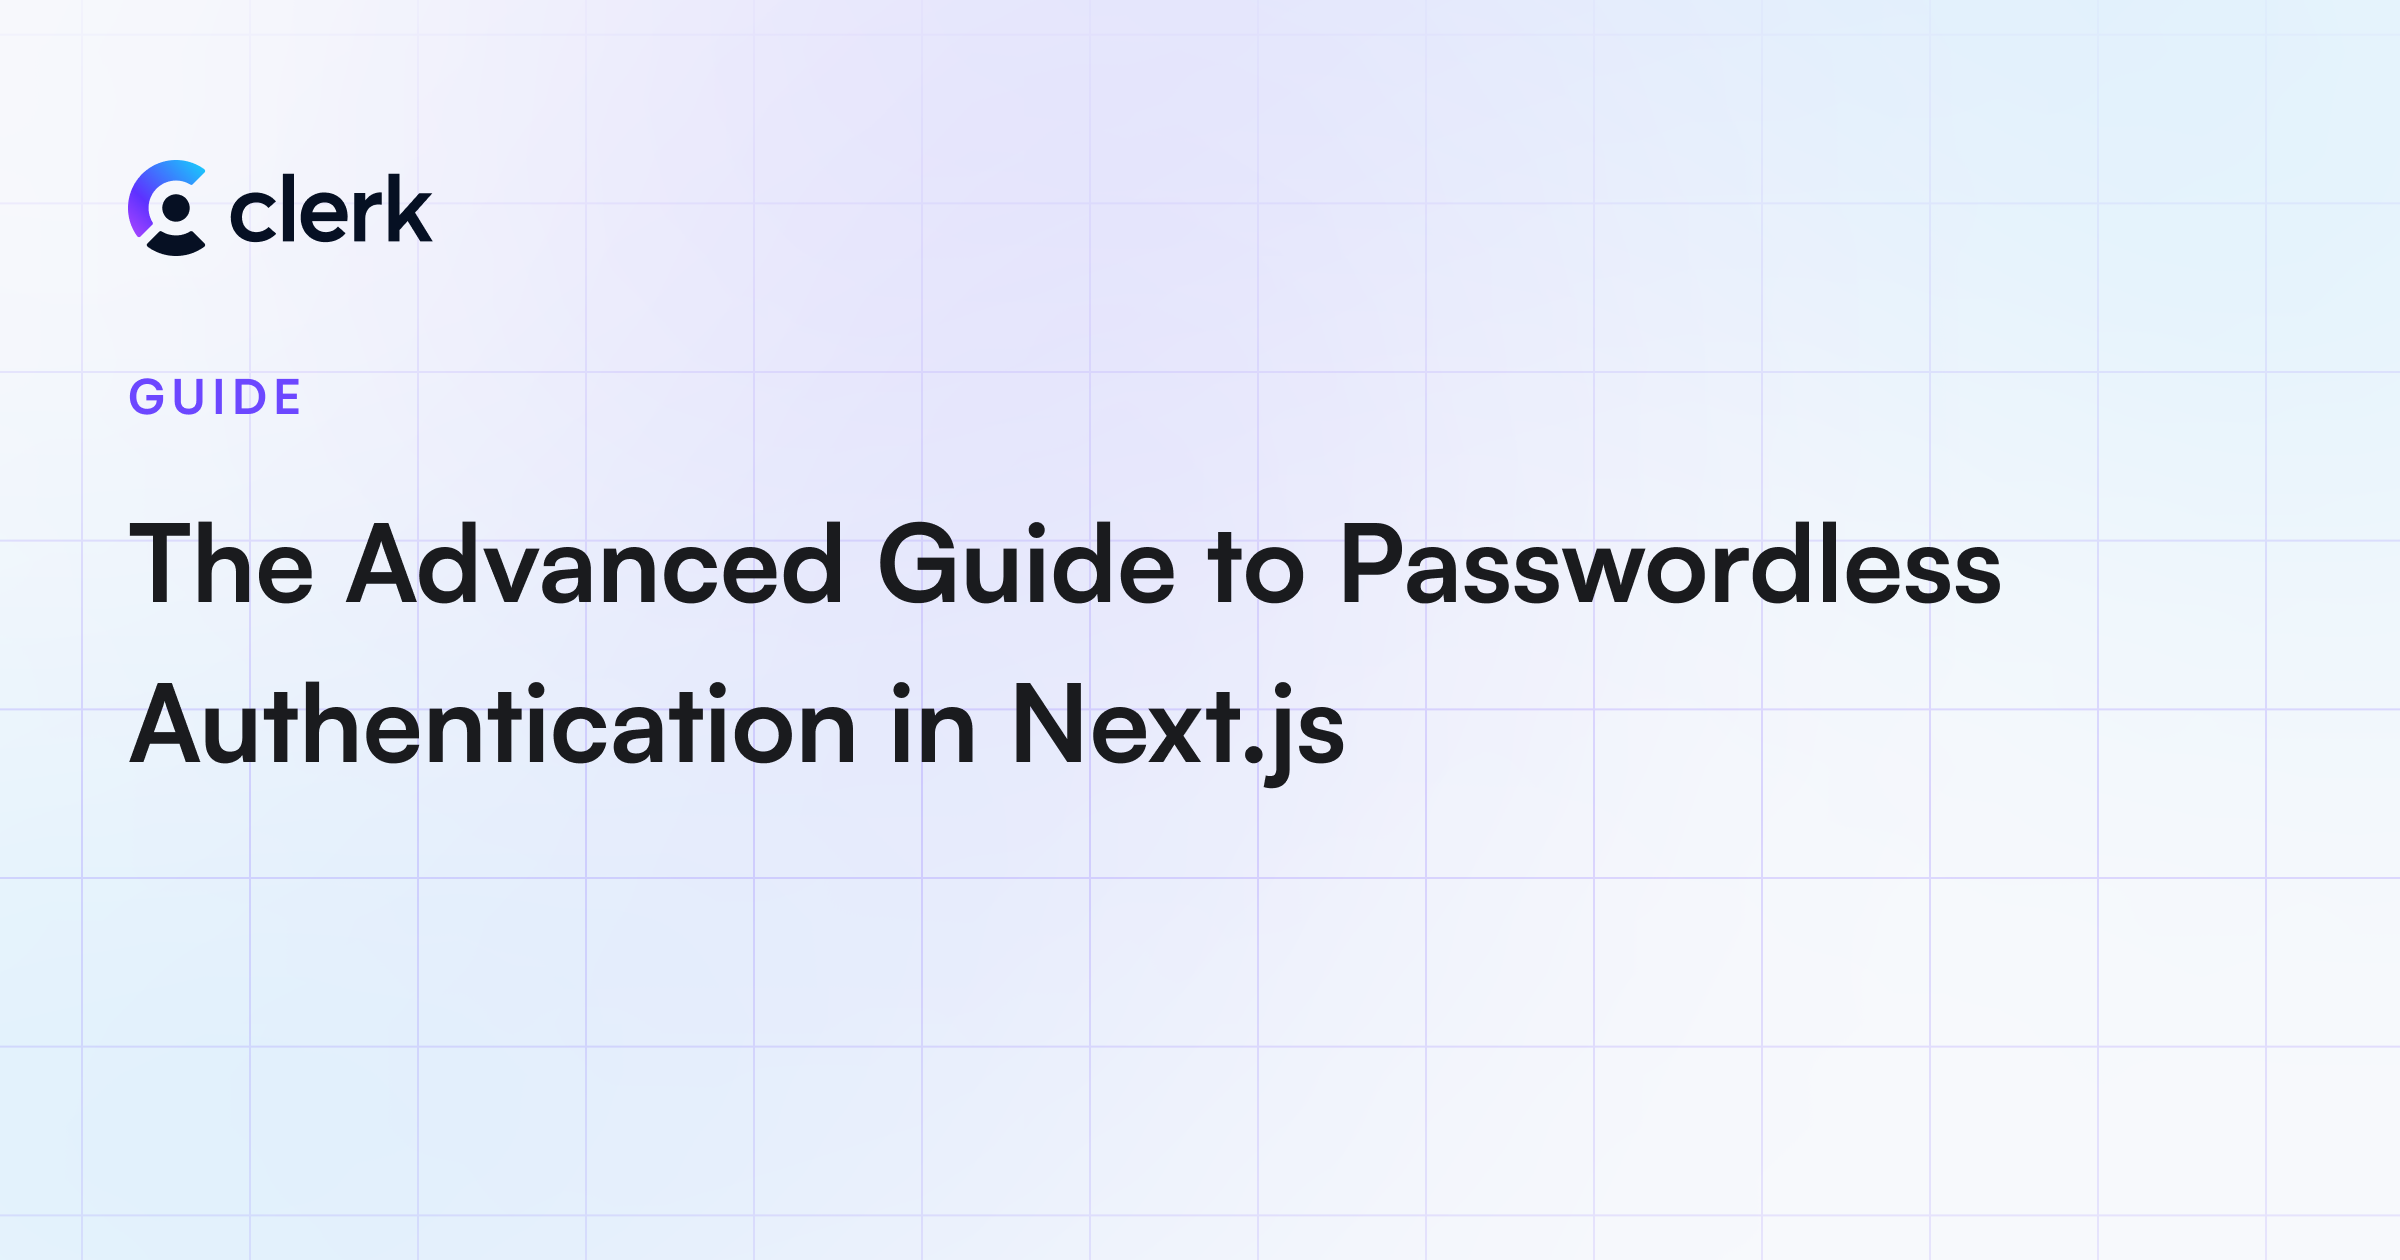 The Advanced Guide to Passwordless Authentication in Next.js